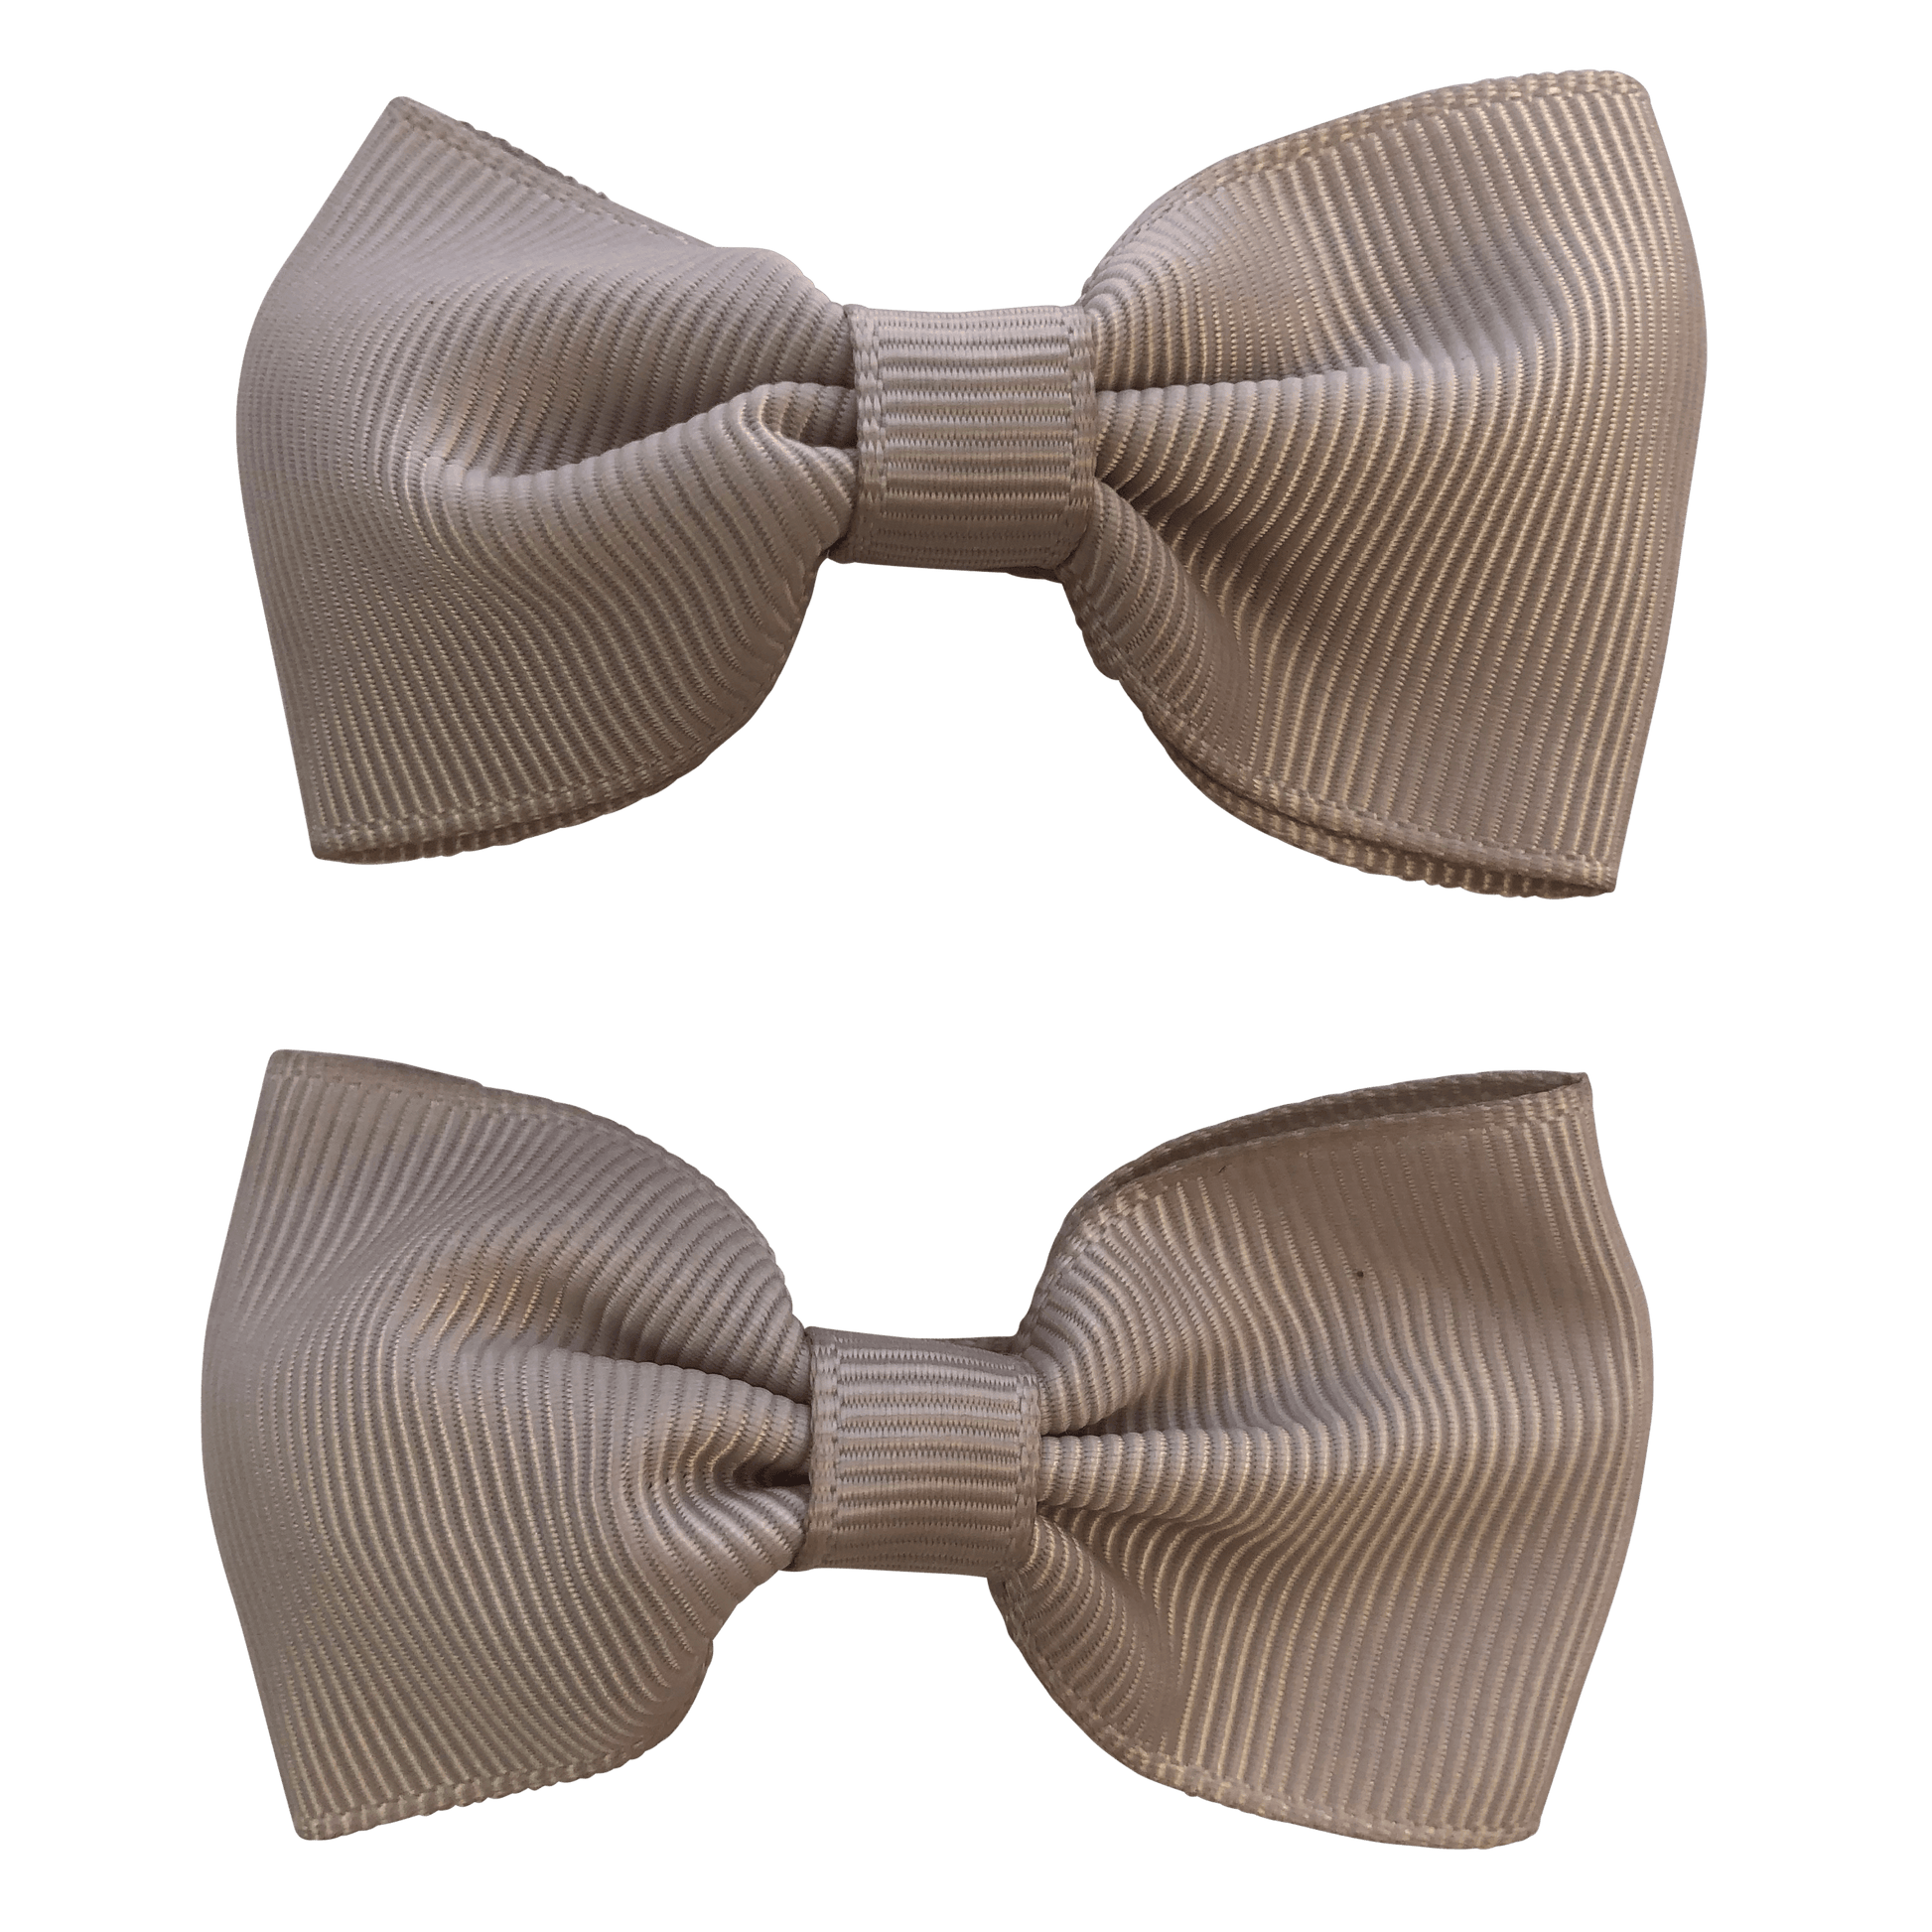 Taupe Hair Accessories - Assorted Hair Accessories - School Uniform Hair Accessories - Ponytails and Fairytales